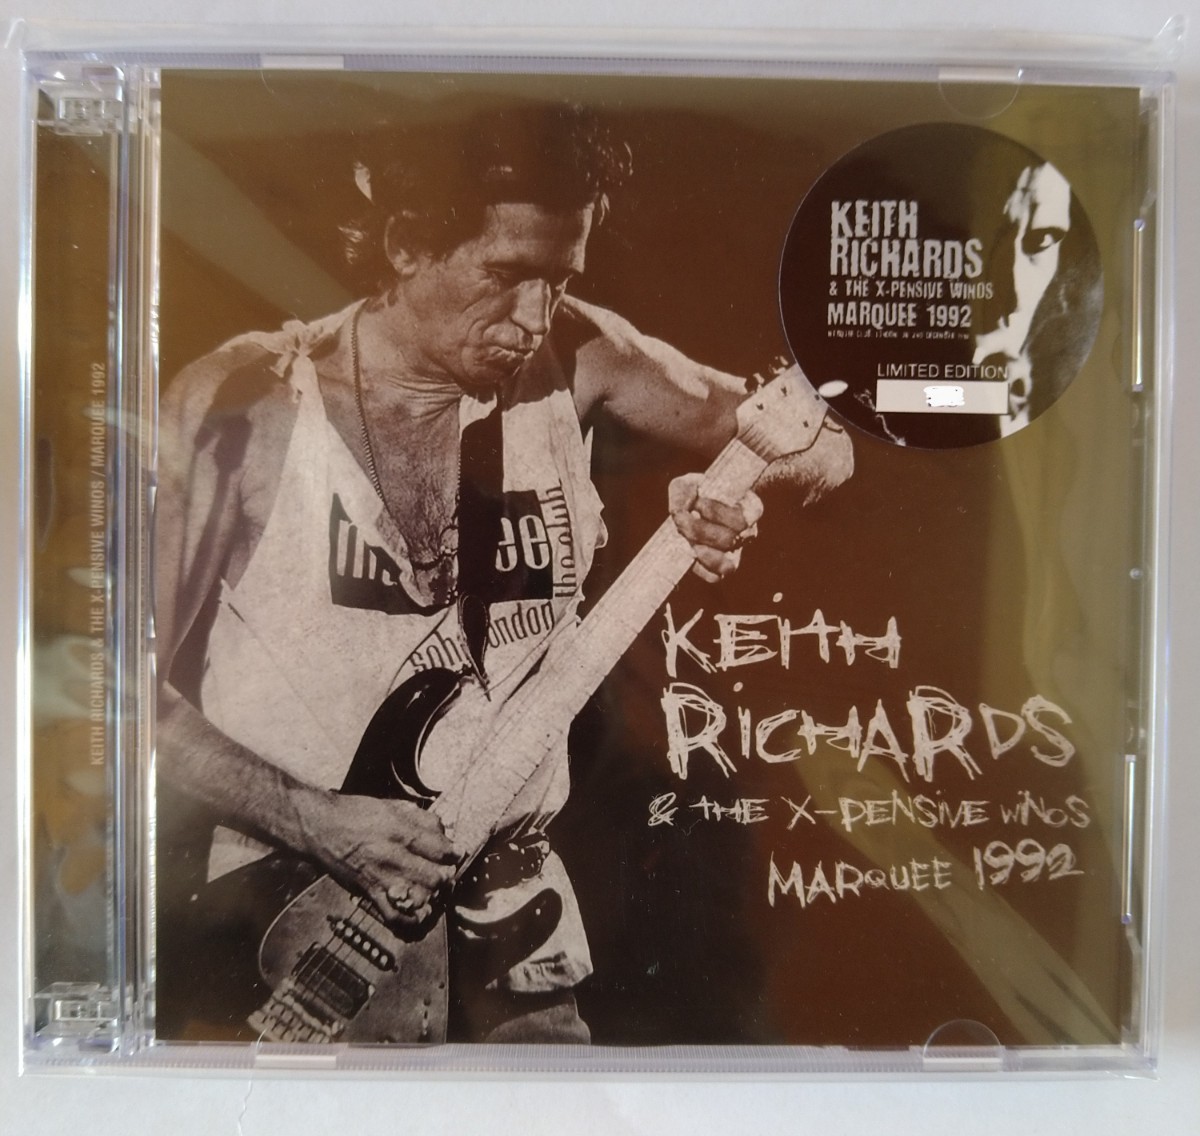 Keith Richards & the X-pensive winos★Marquee 1992★_画像1